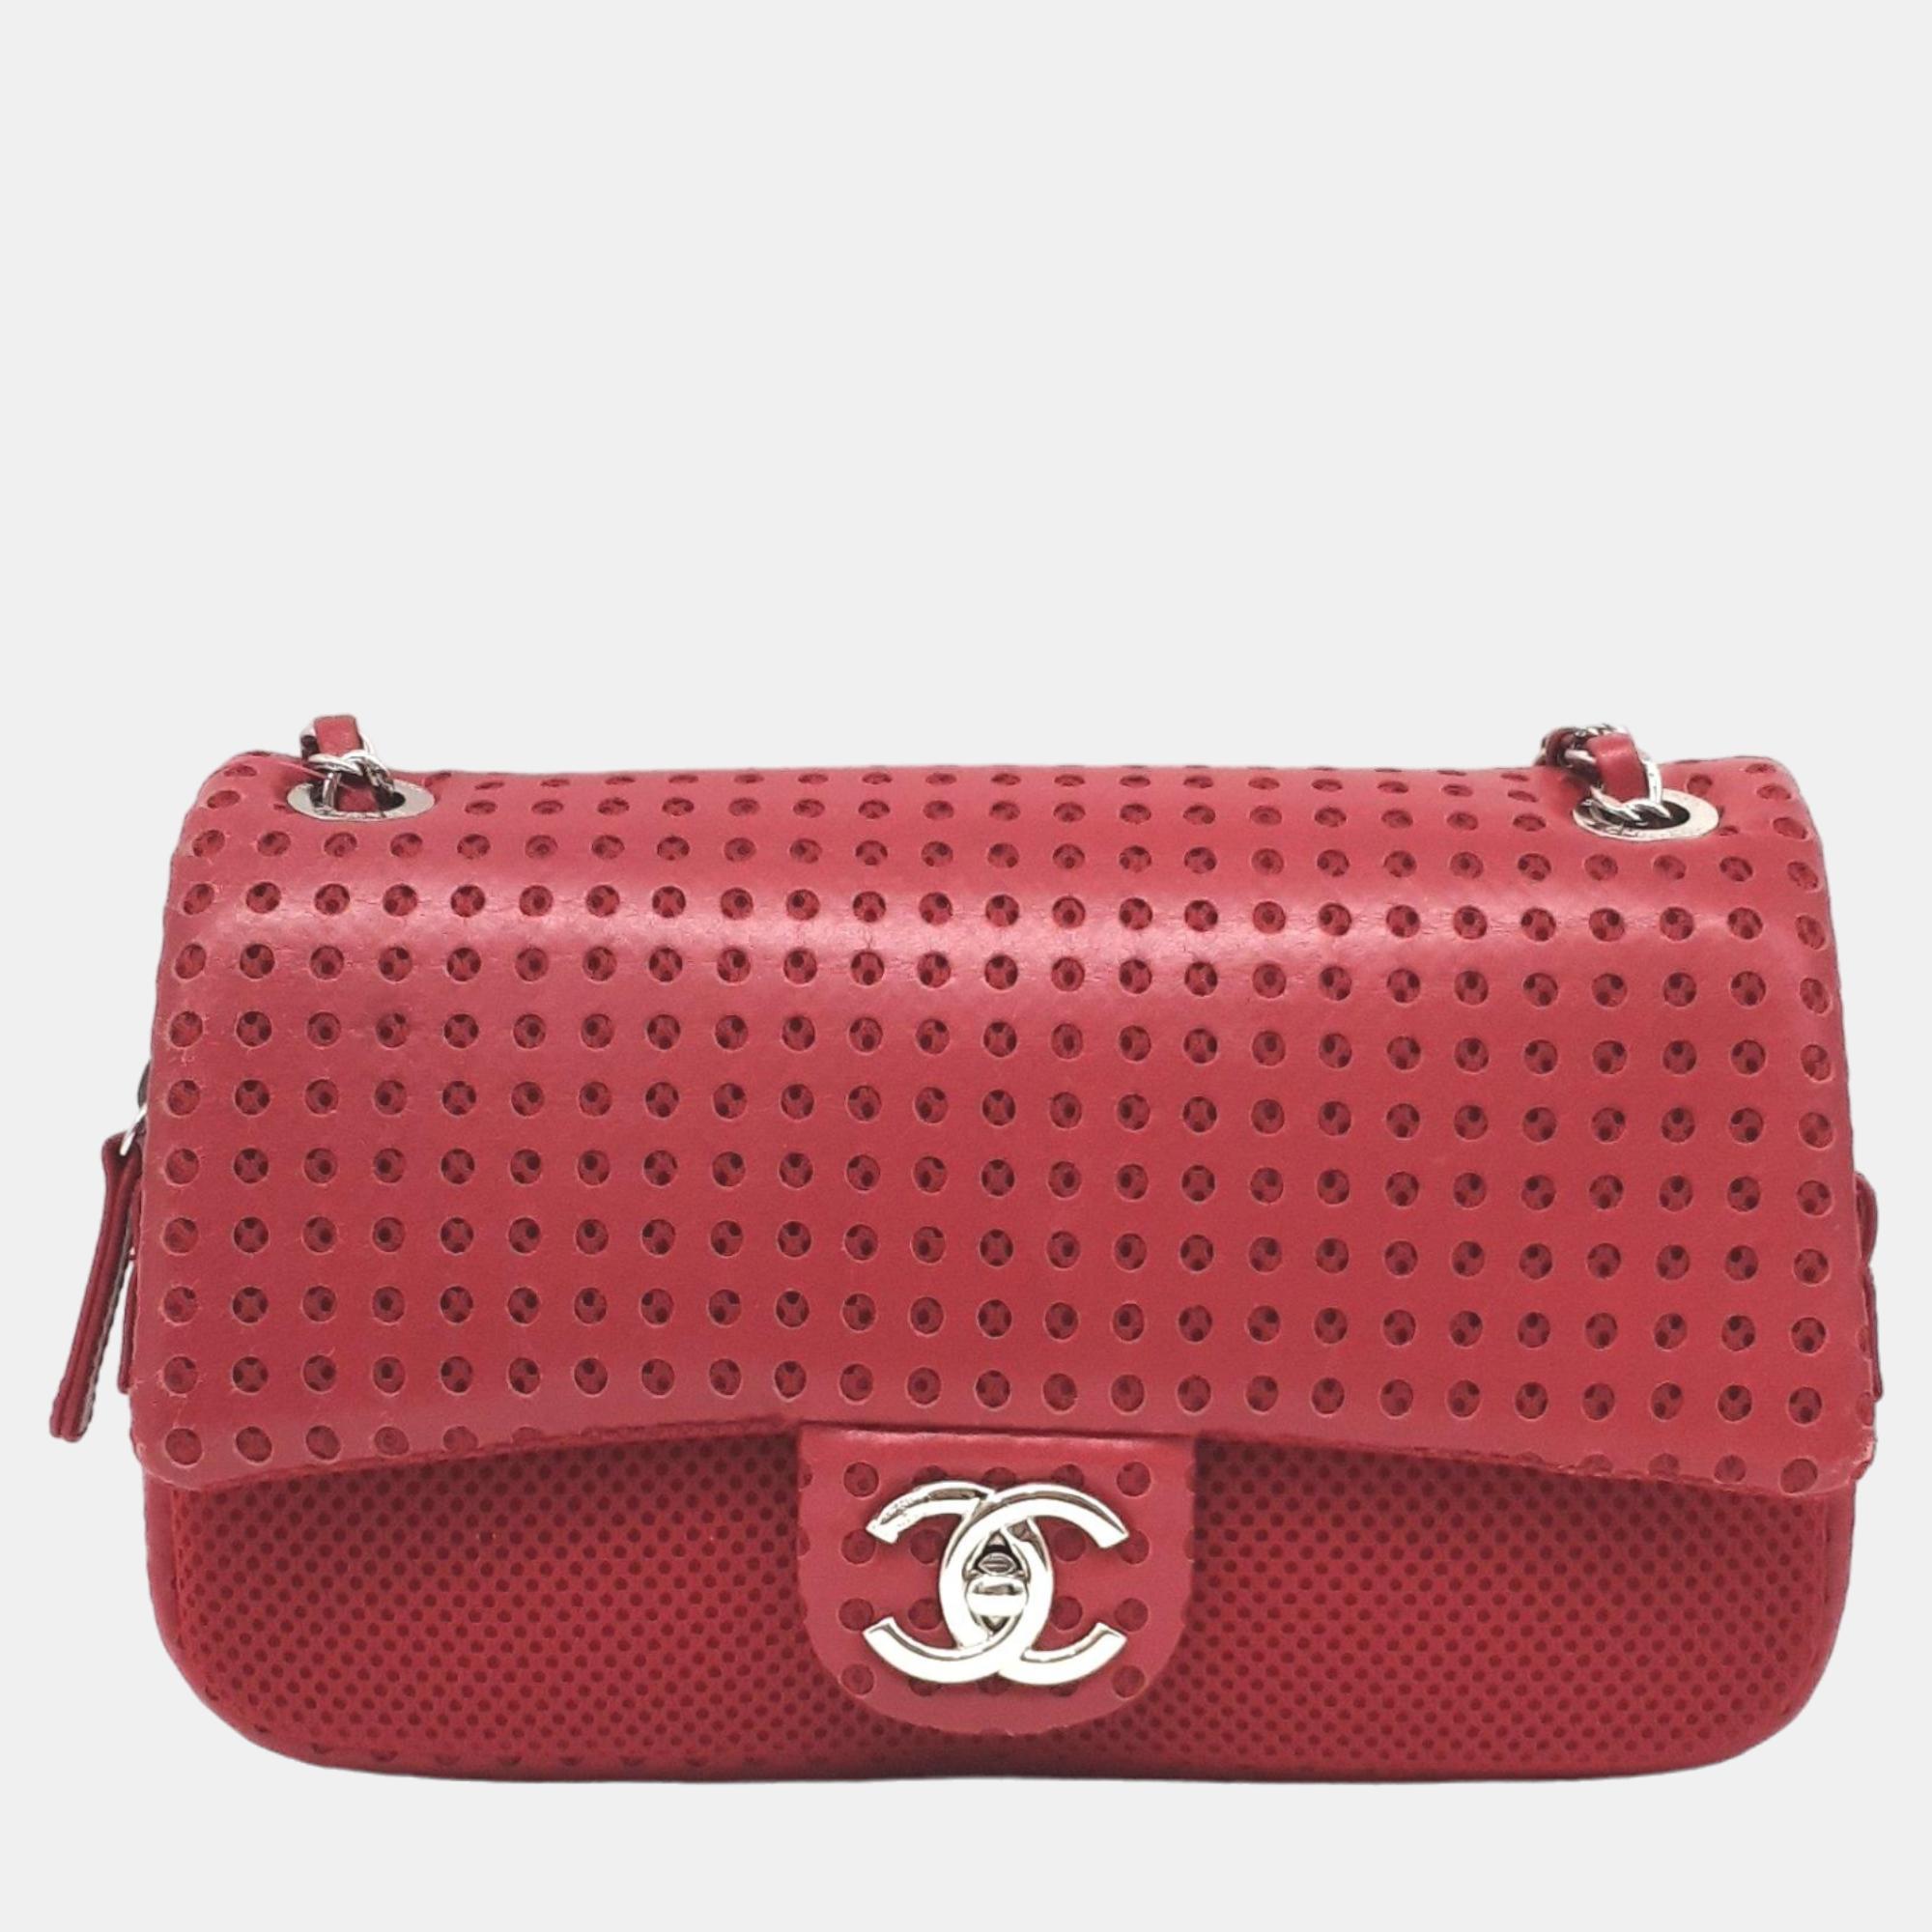 Chanel red leather perforated  easy flap shoulder bag